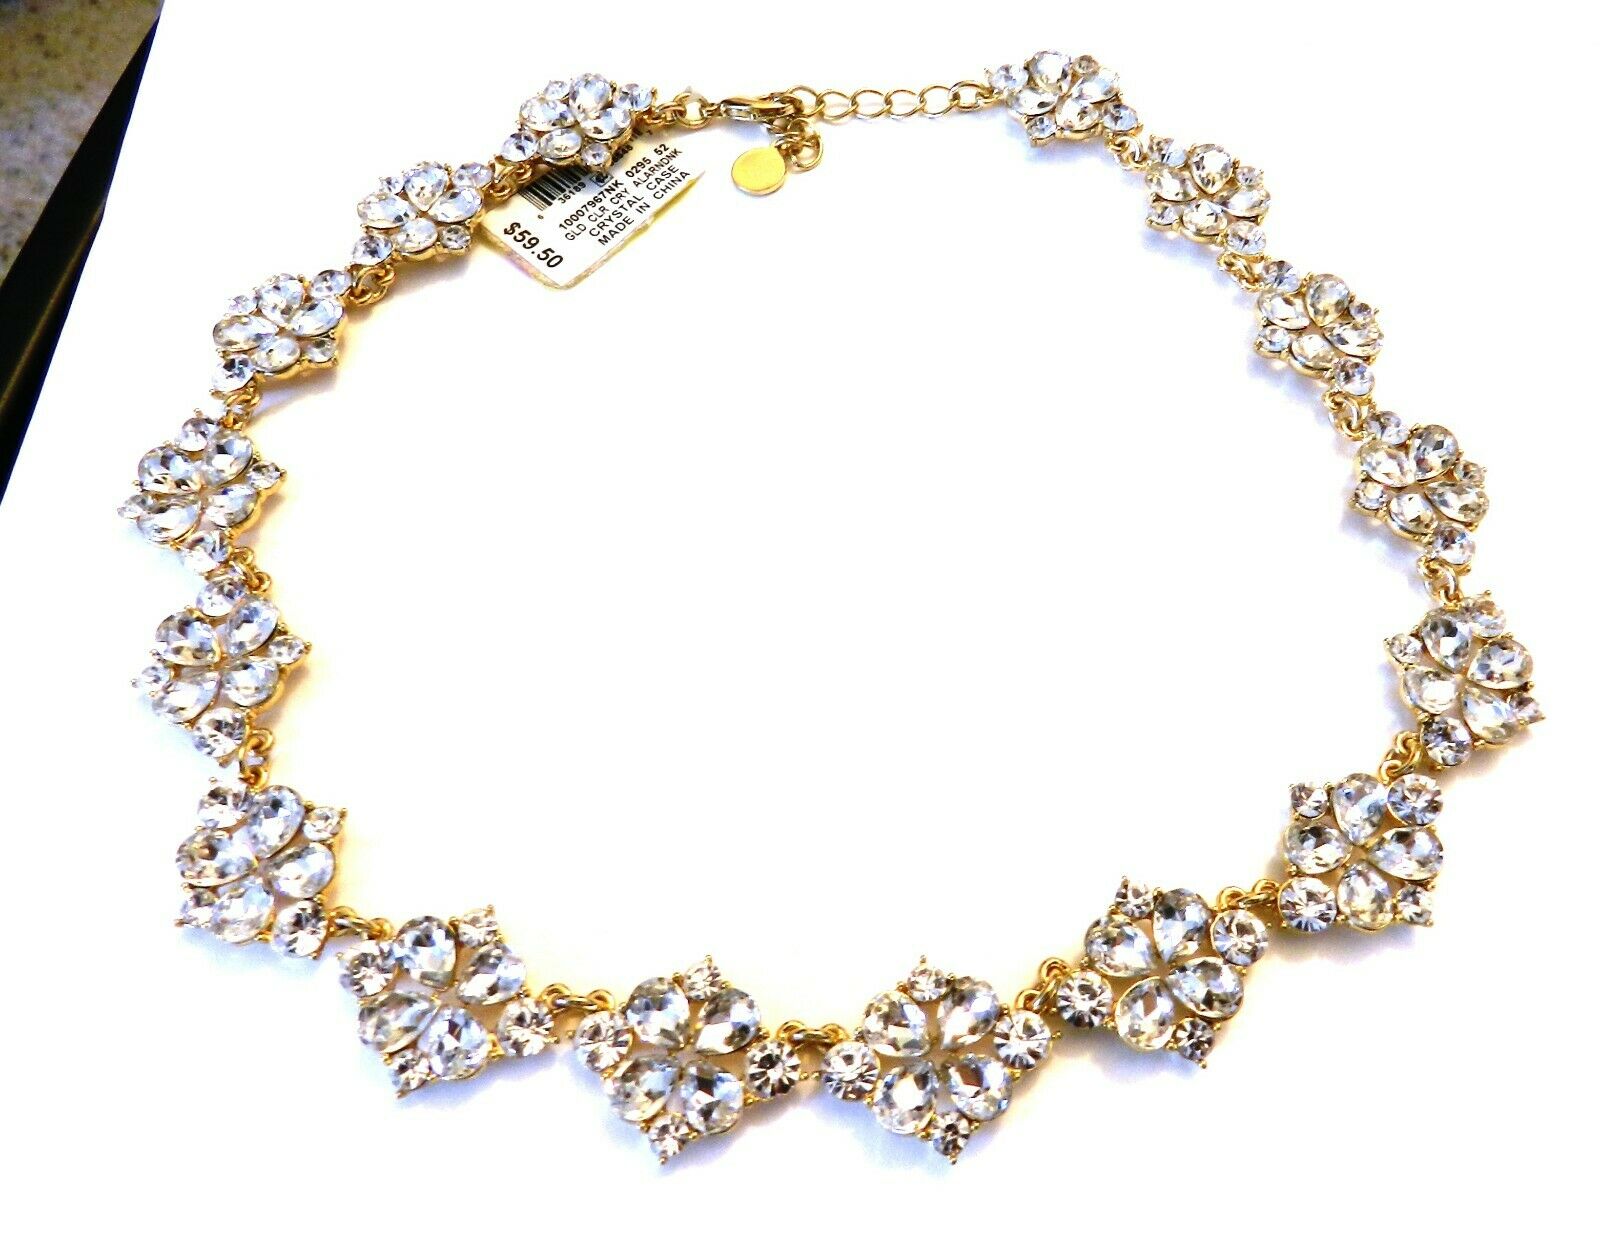 Charter Club Gold Tone Crystal Statement Necklace $59